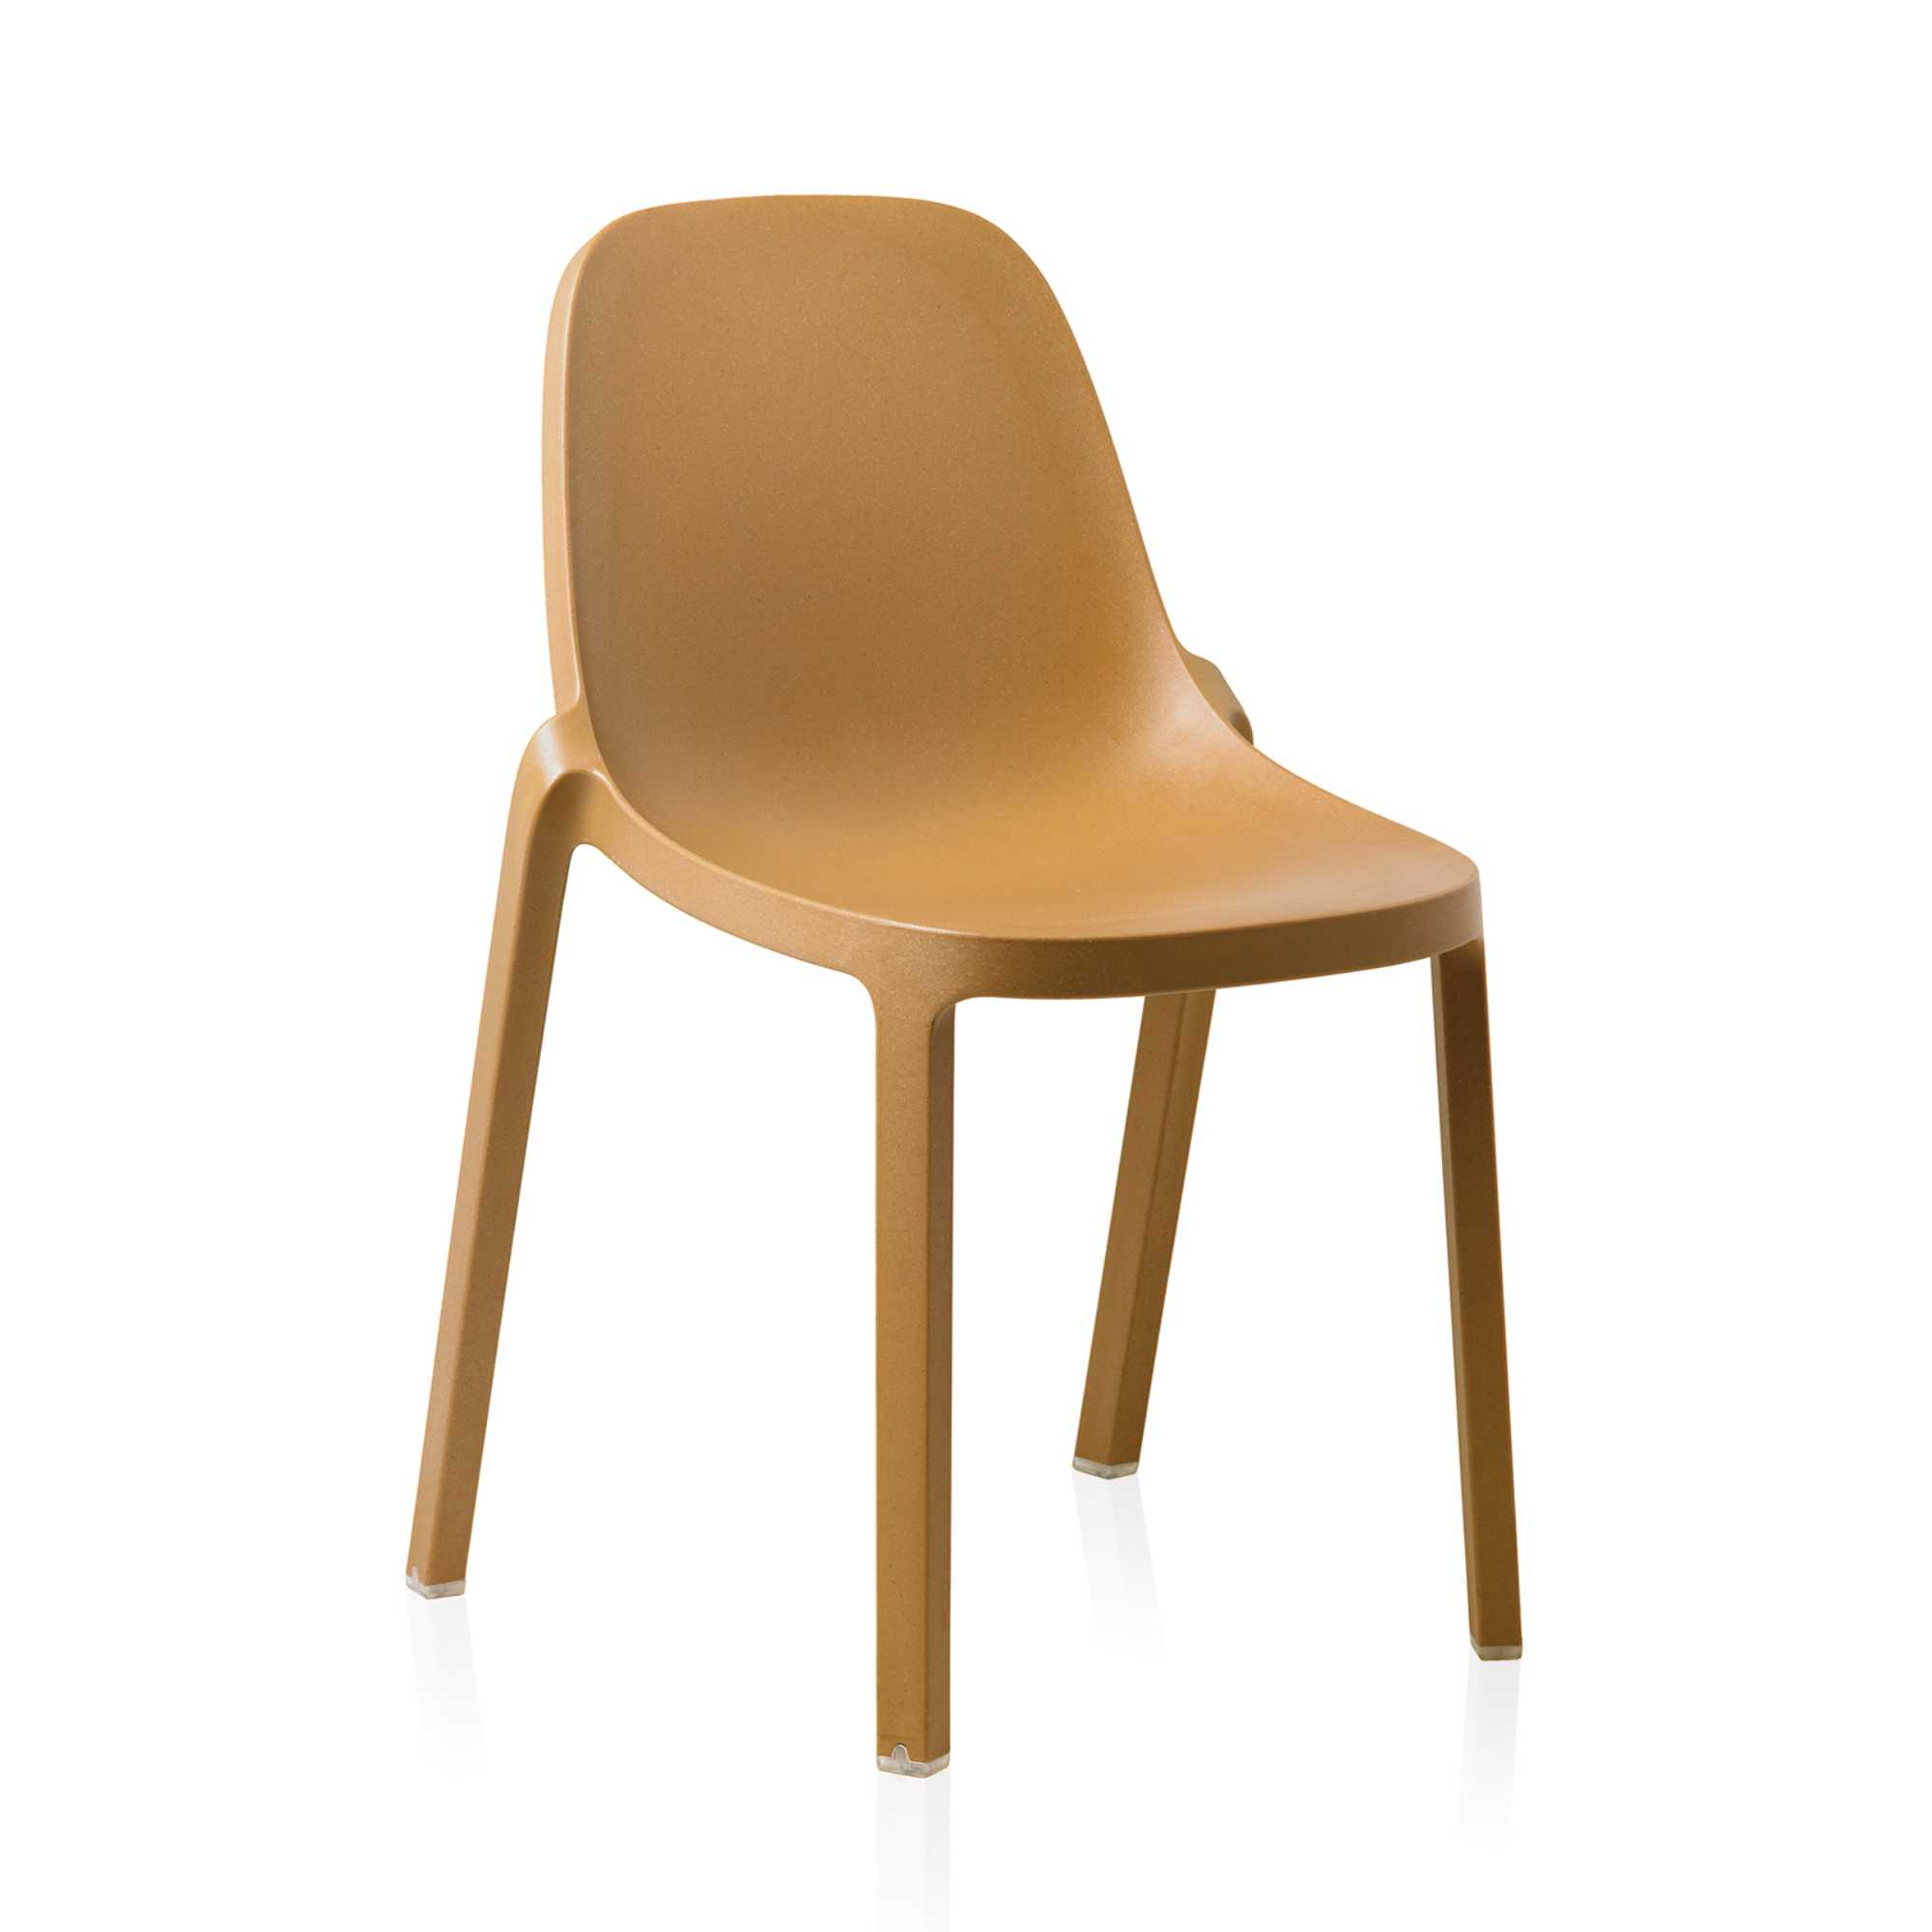 Emeco Broom stacking chair, natural